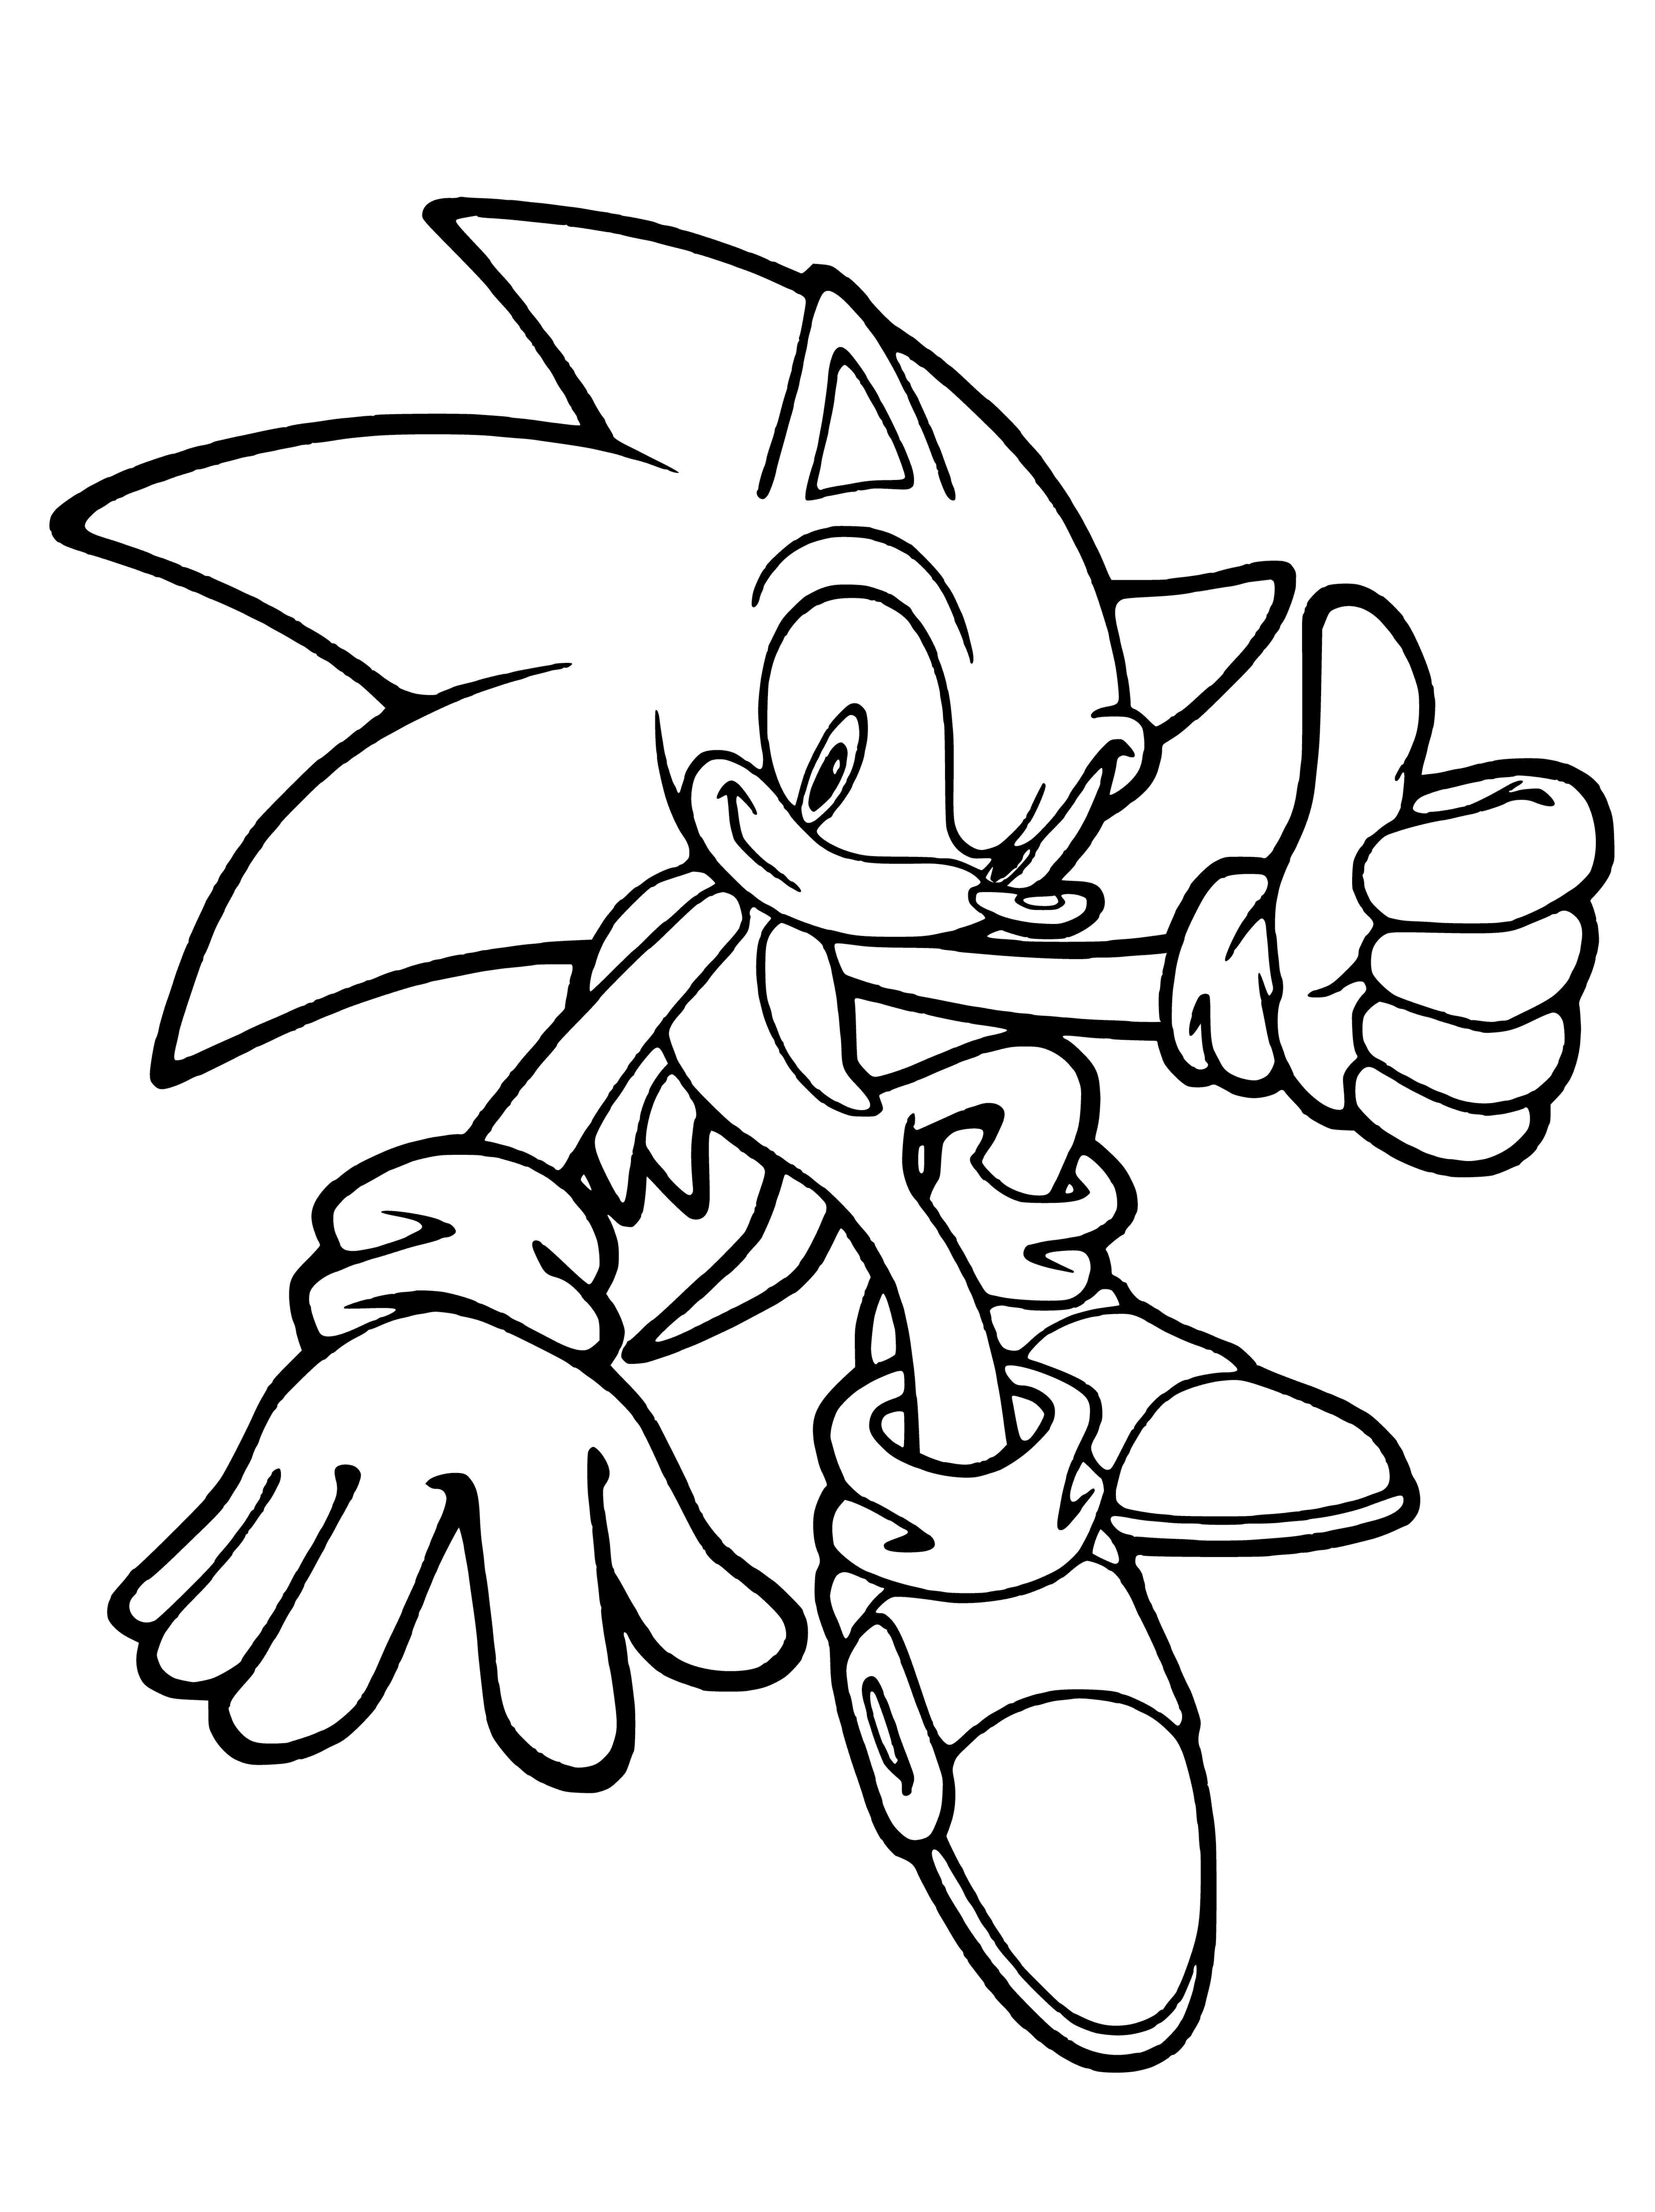 coloring page: Sonic races down a path in a green field surrounded by tall trees, blue sky above. Running fast with a look of determination, holding right hand out, left hand behind.